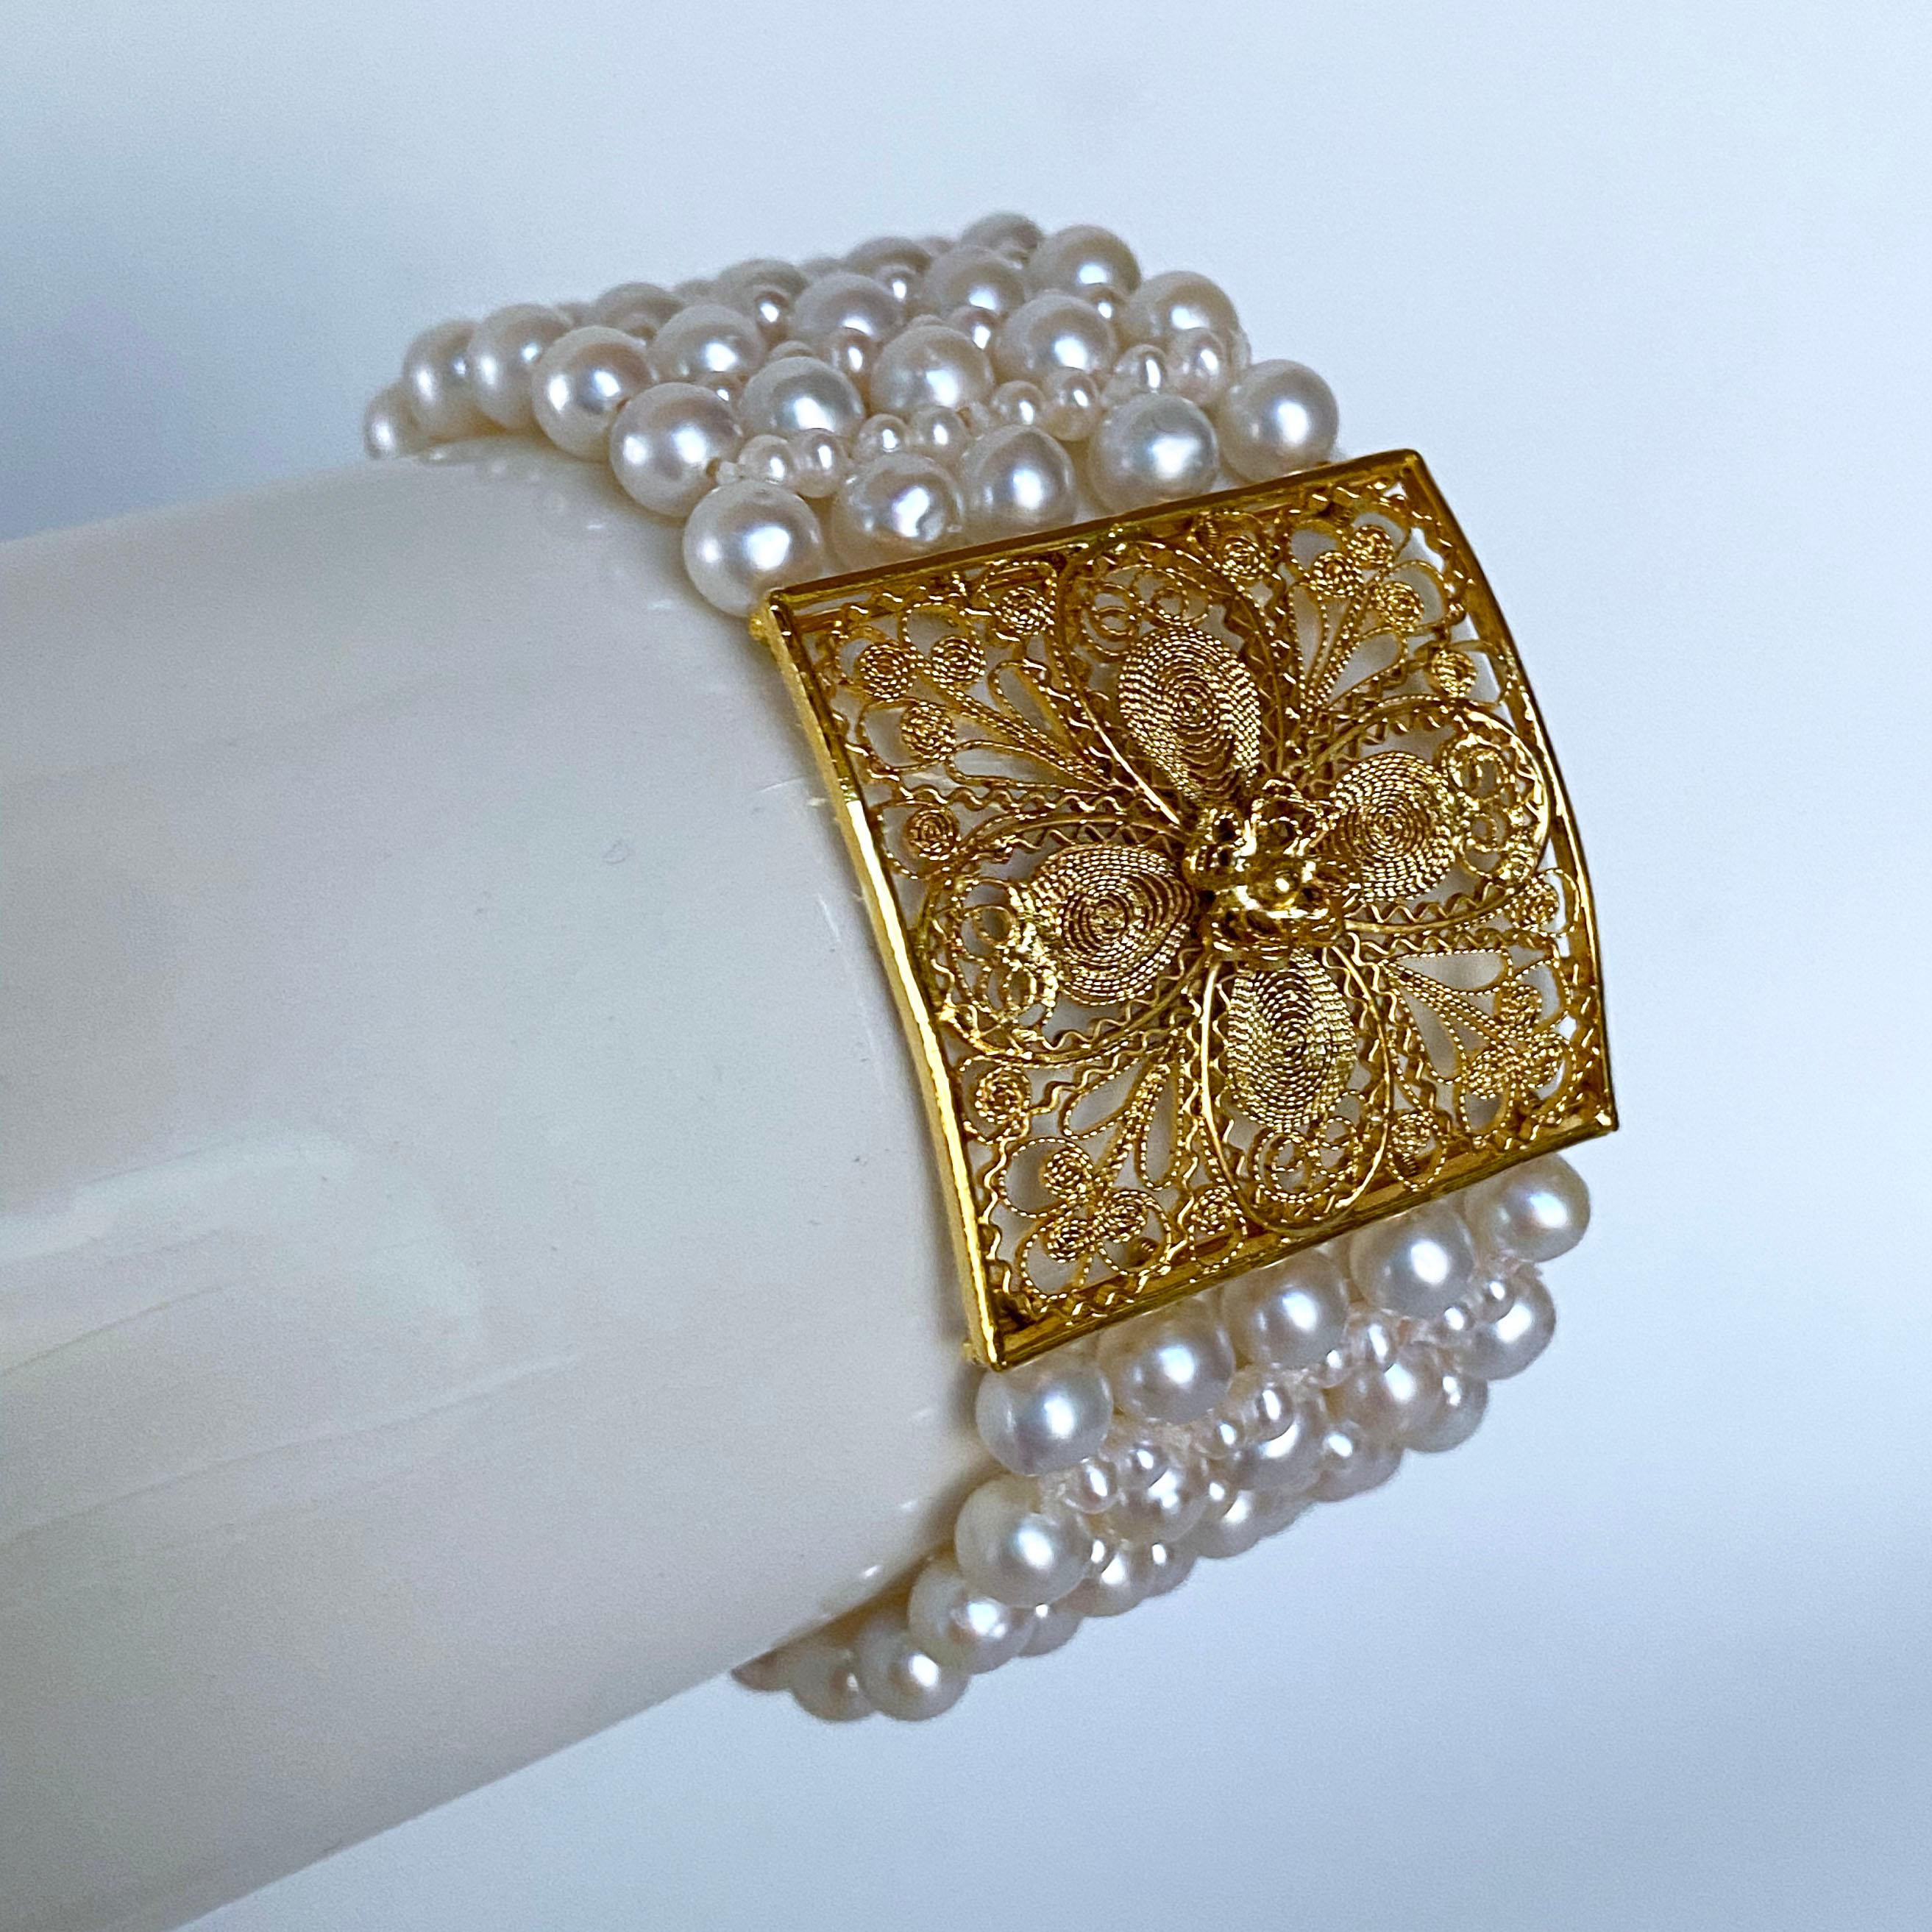 Bead Marina J. Pearl Woven Bracelet with 18k Yellow Gold Floral Centerpiece 